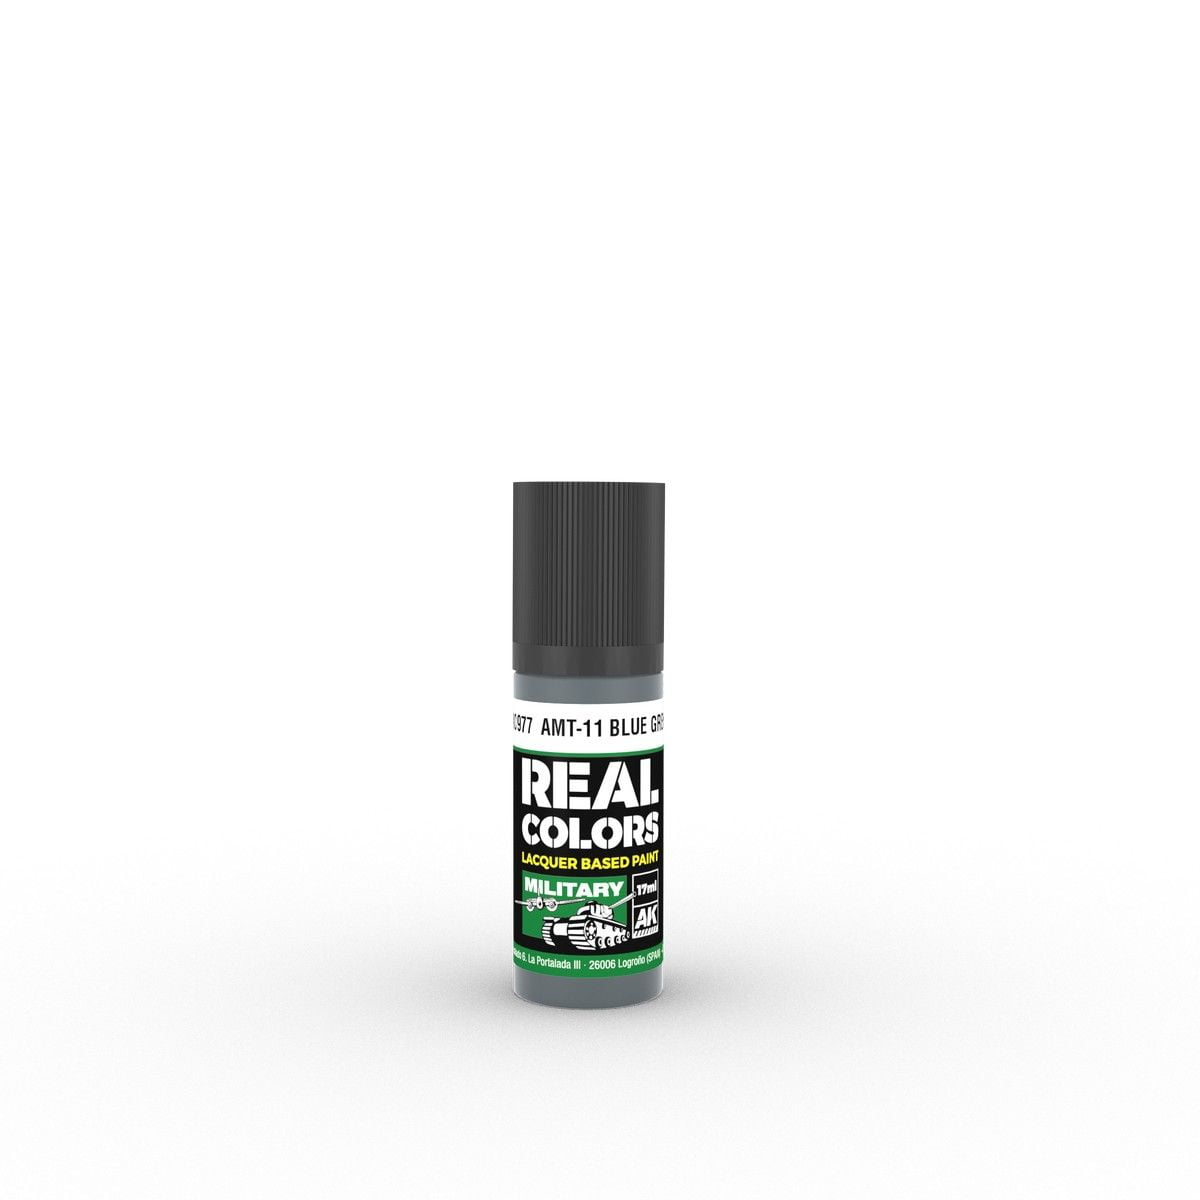 Real Colors Military: AMT-11 Blue Grey 17ml